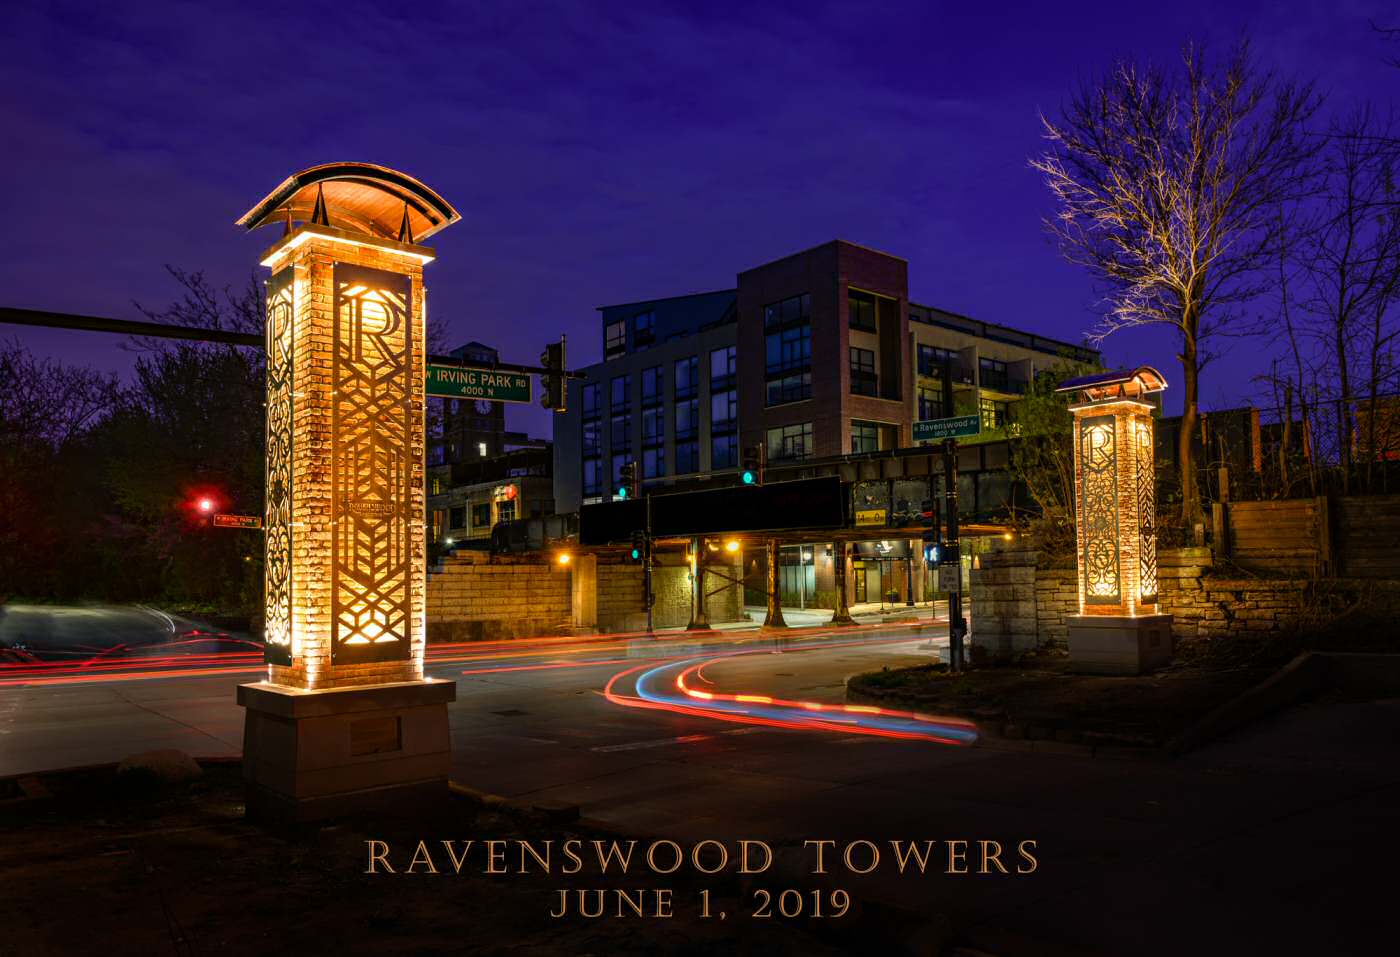 Ravenswood Towers